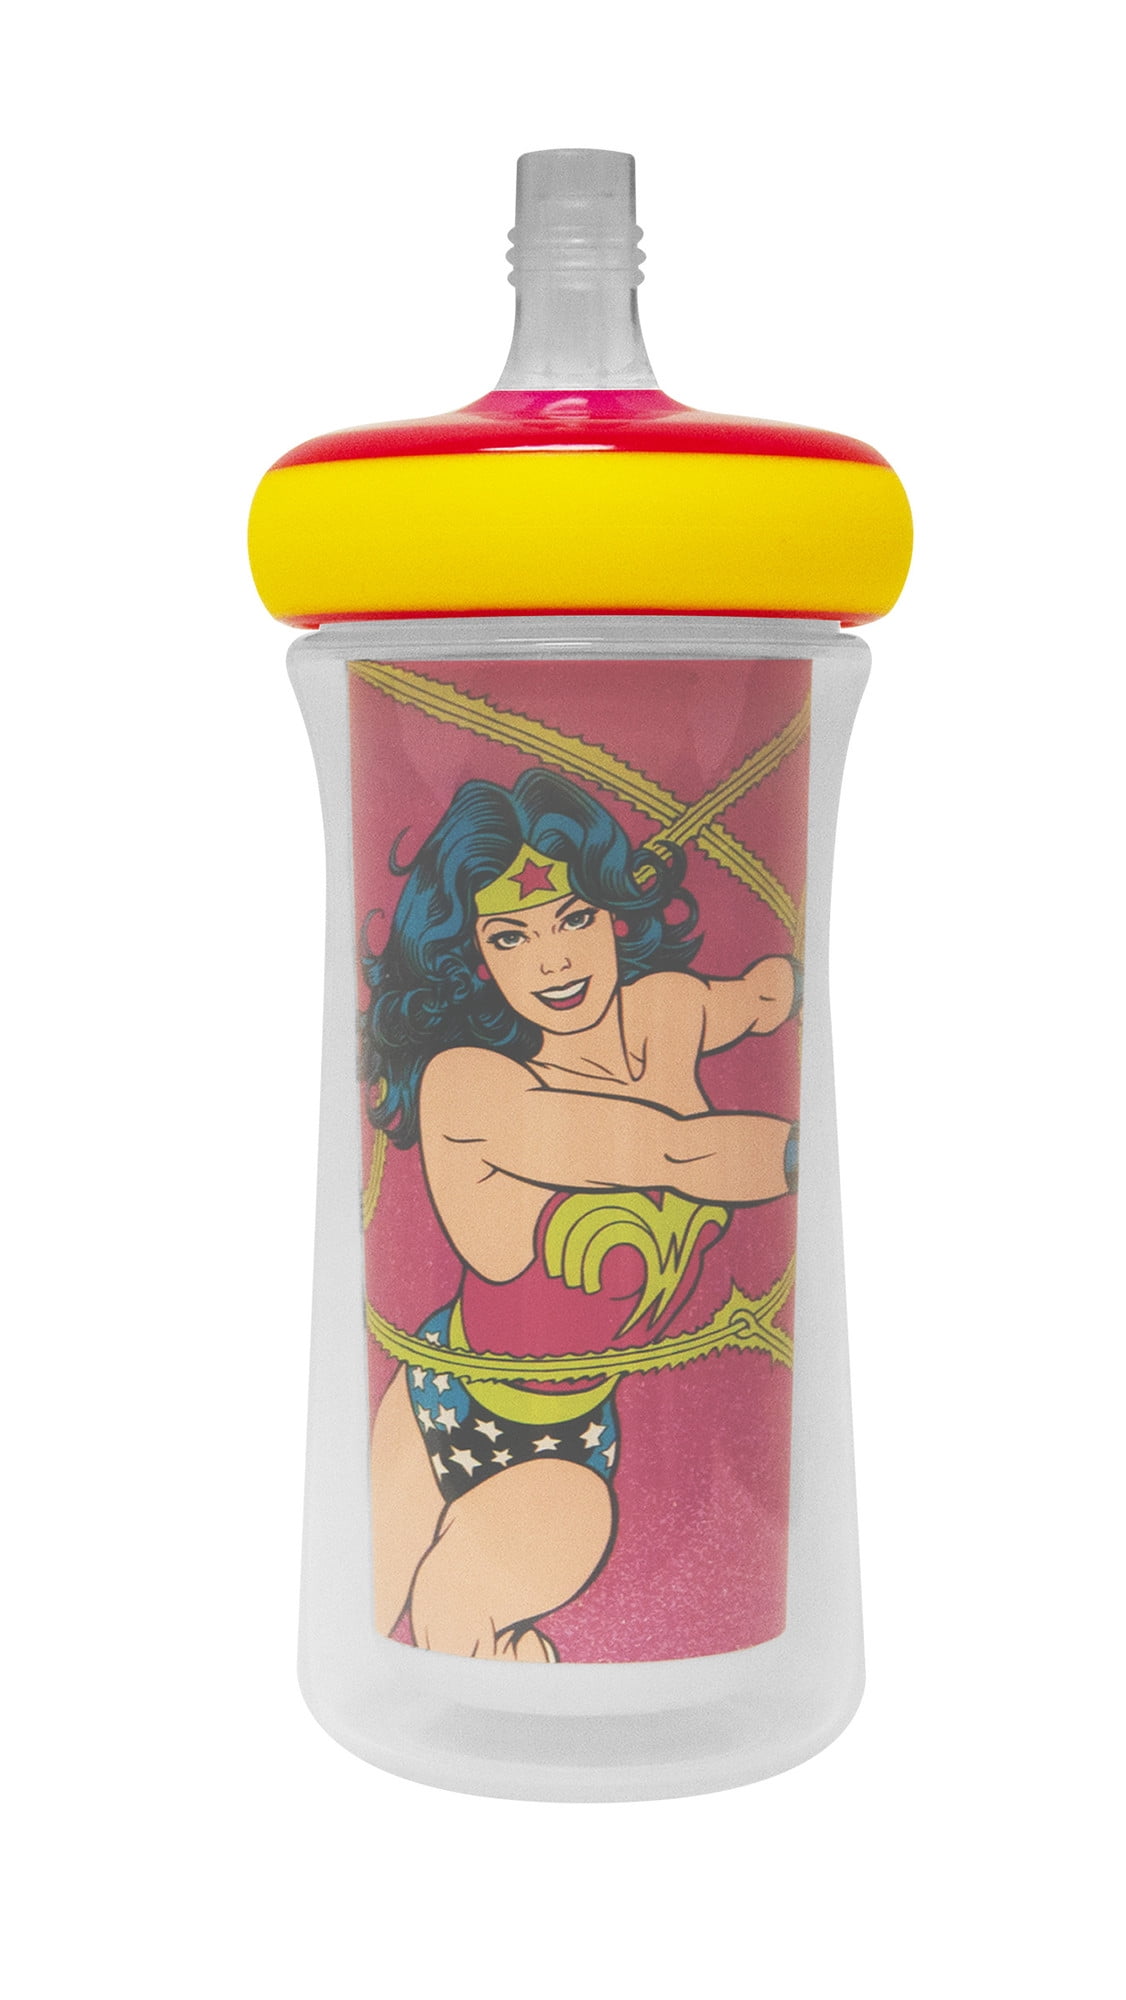 Photo 1 of Wonder Woman Sippy Cup. Wonder Woman sippy cup is perfect for toddlers 18 month and older to transition from baby bottles to cups. It has an insulated straw cup. It features popular DC superhero Wonderwoman.